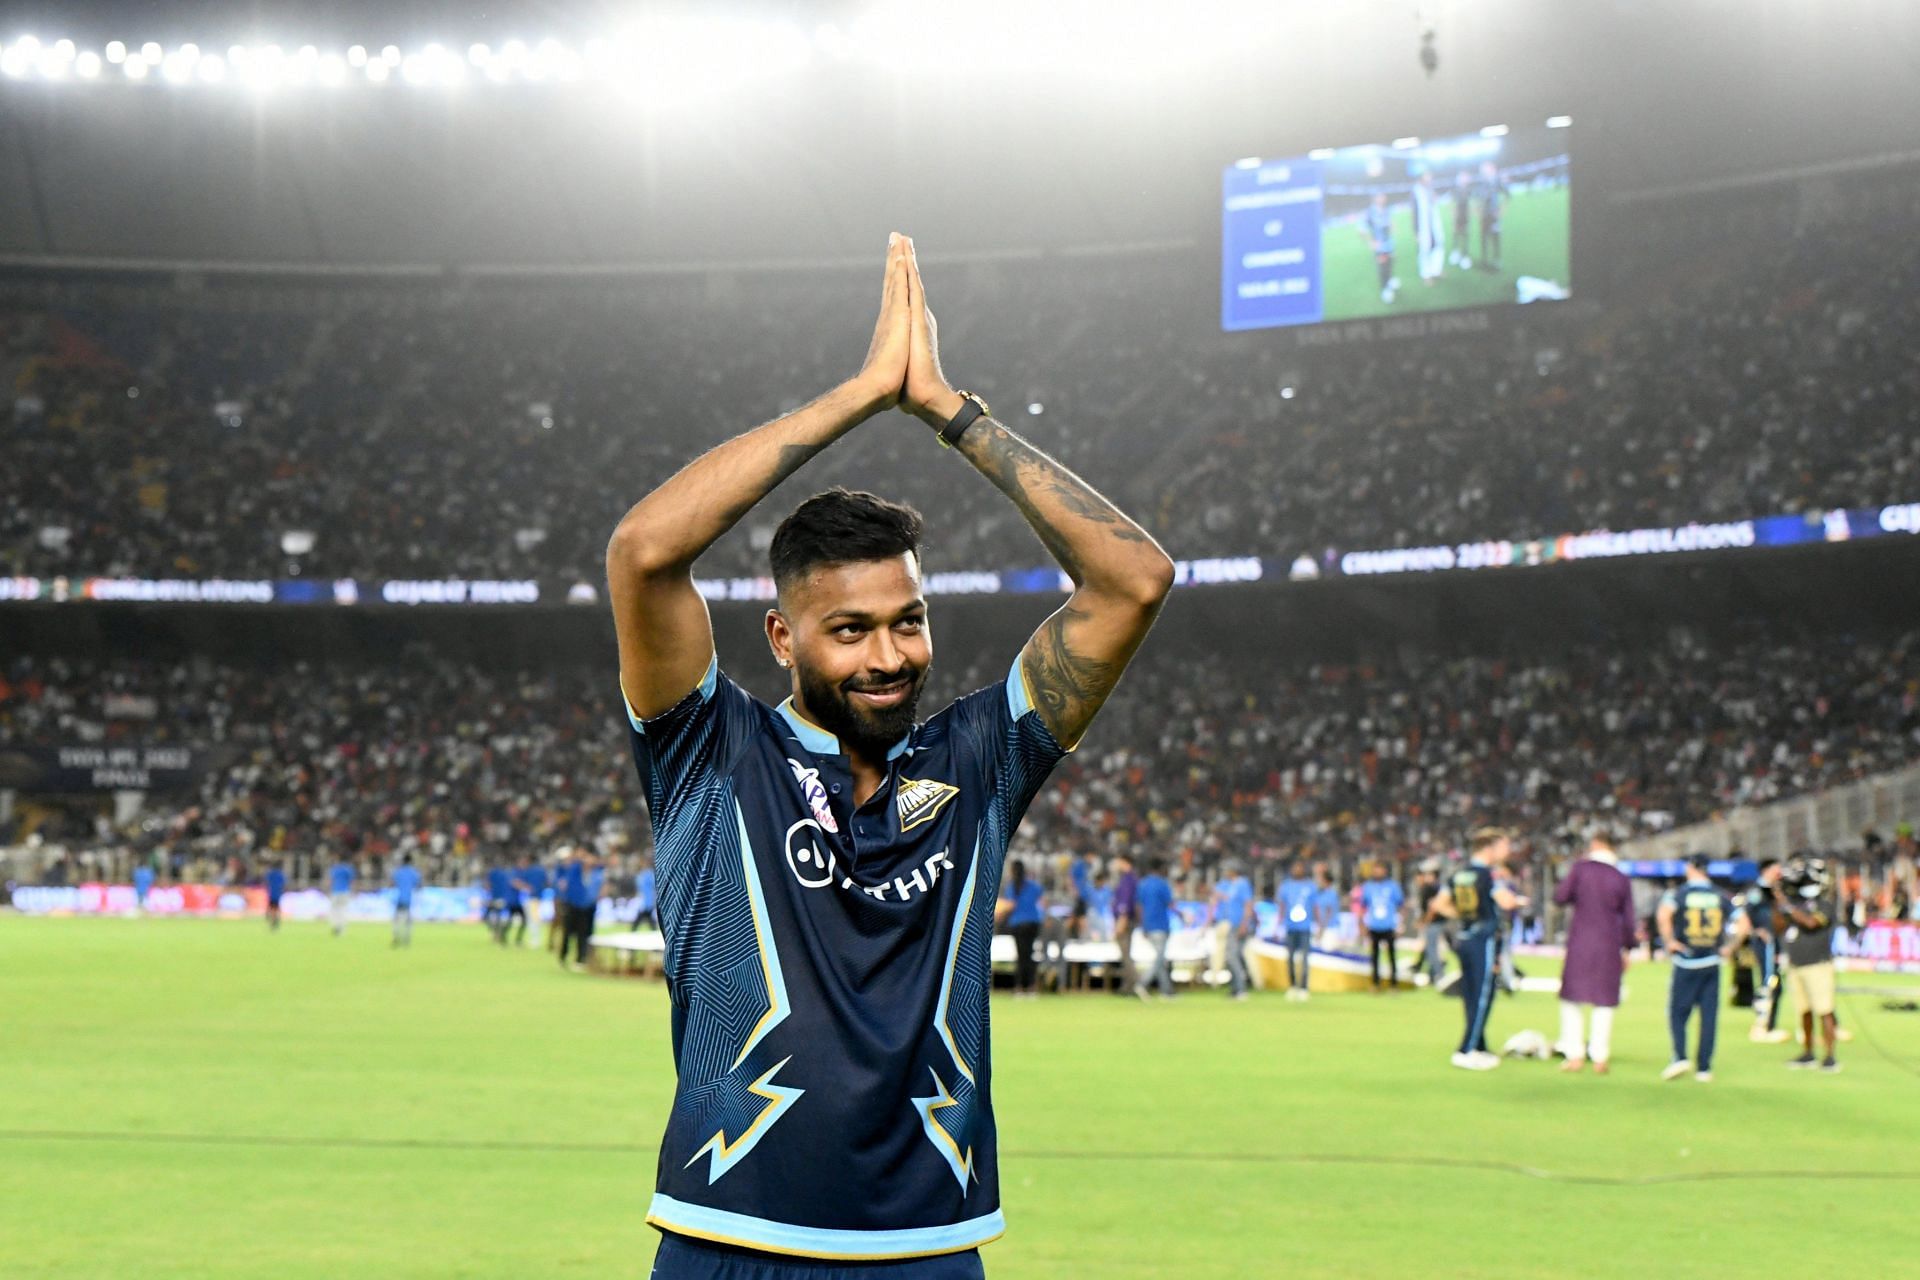 Hardik Pandya acknowledges the Motera crowd after leading GT to IPL victory in their maiden season [Credits: IPL]